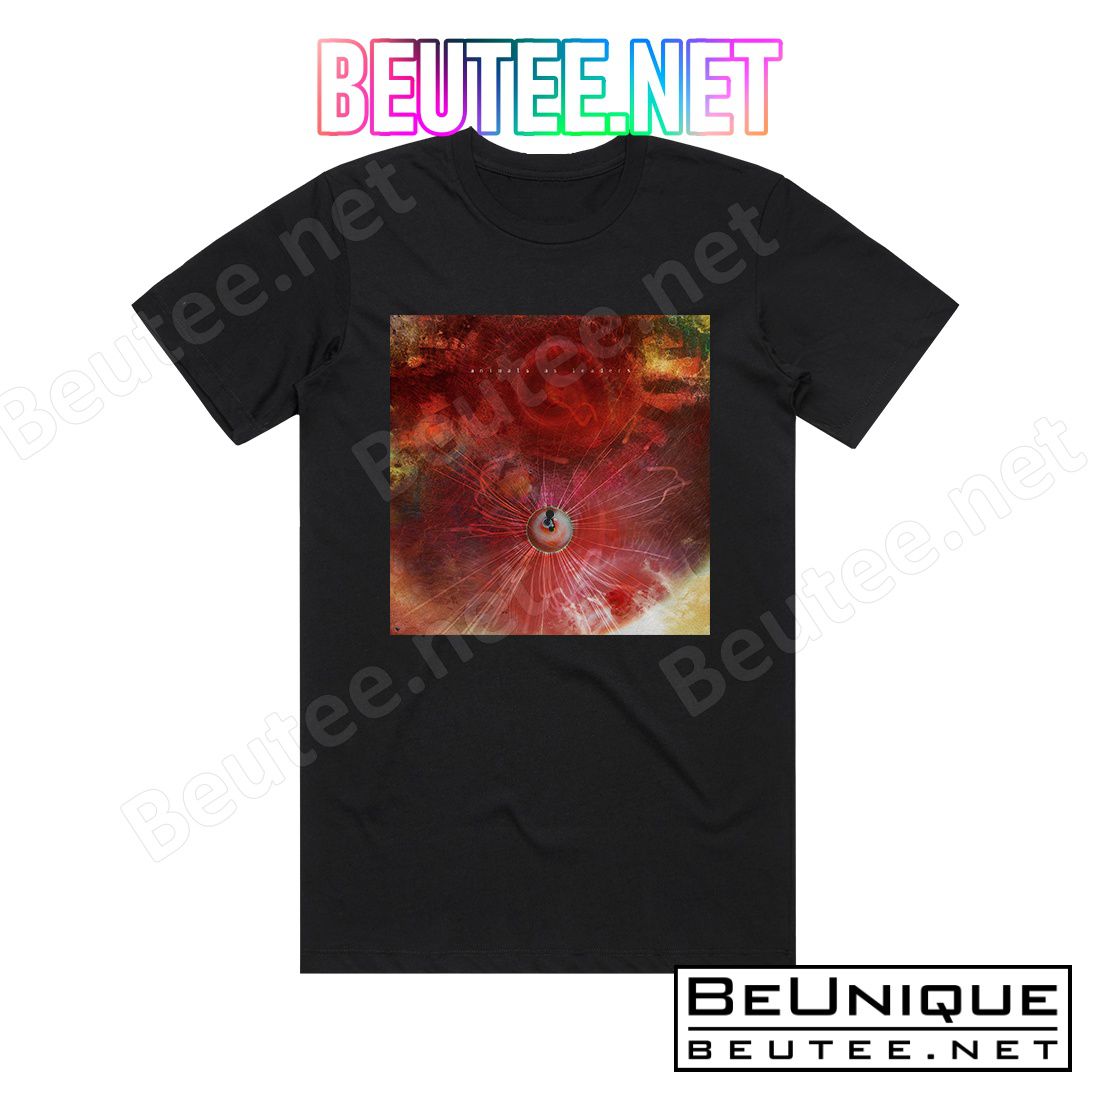 Animals as Leaders The Joy Of Motion Album Cover T-Shirt